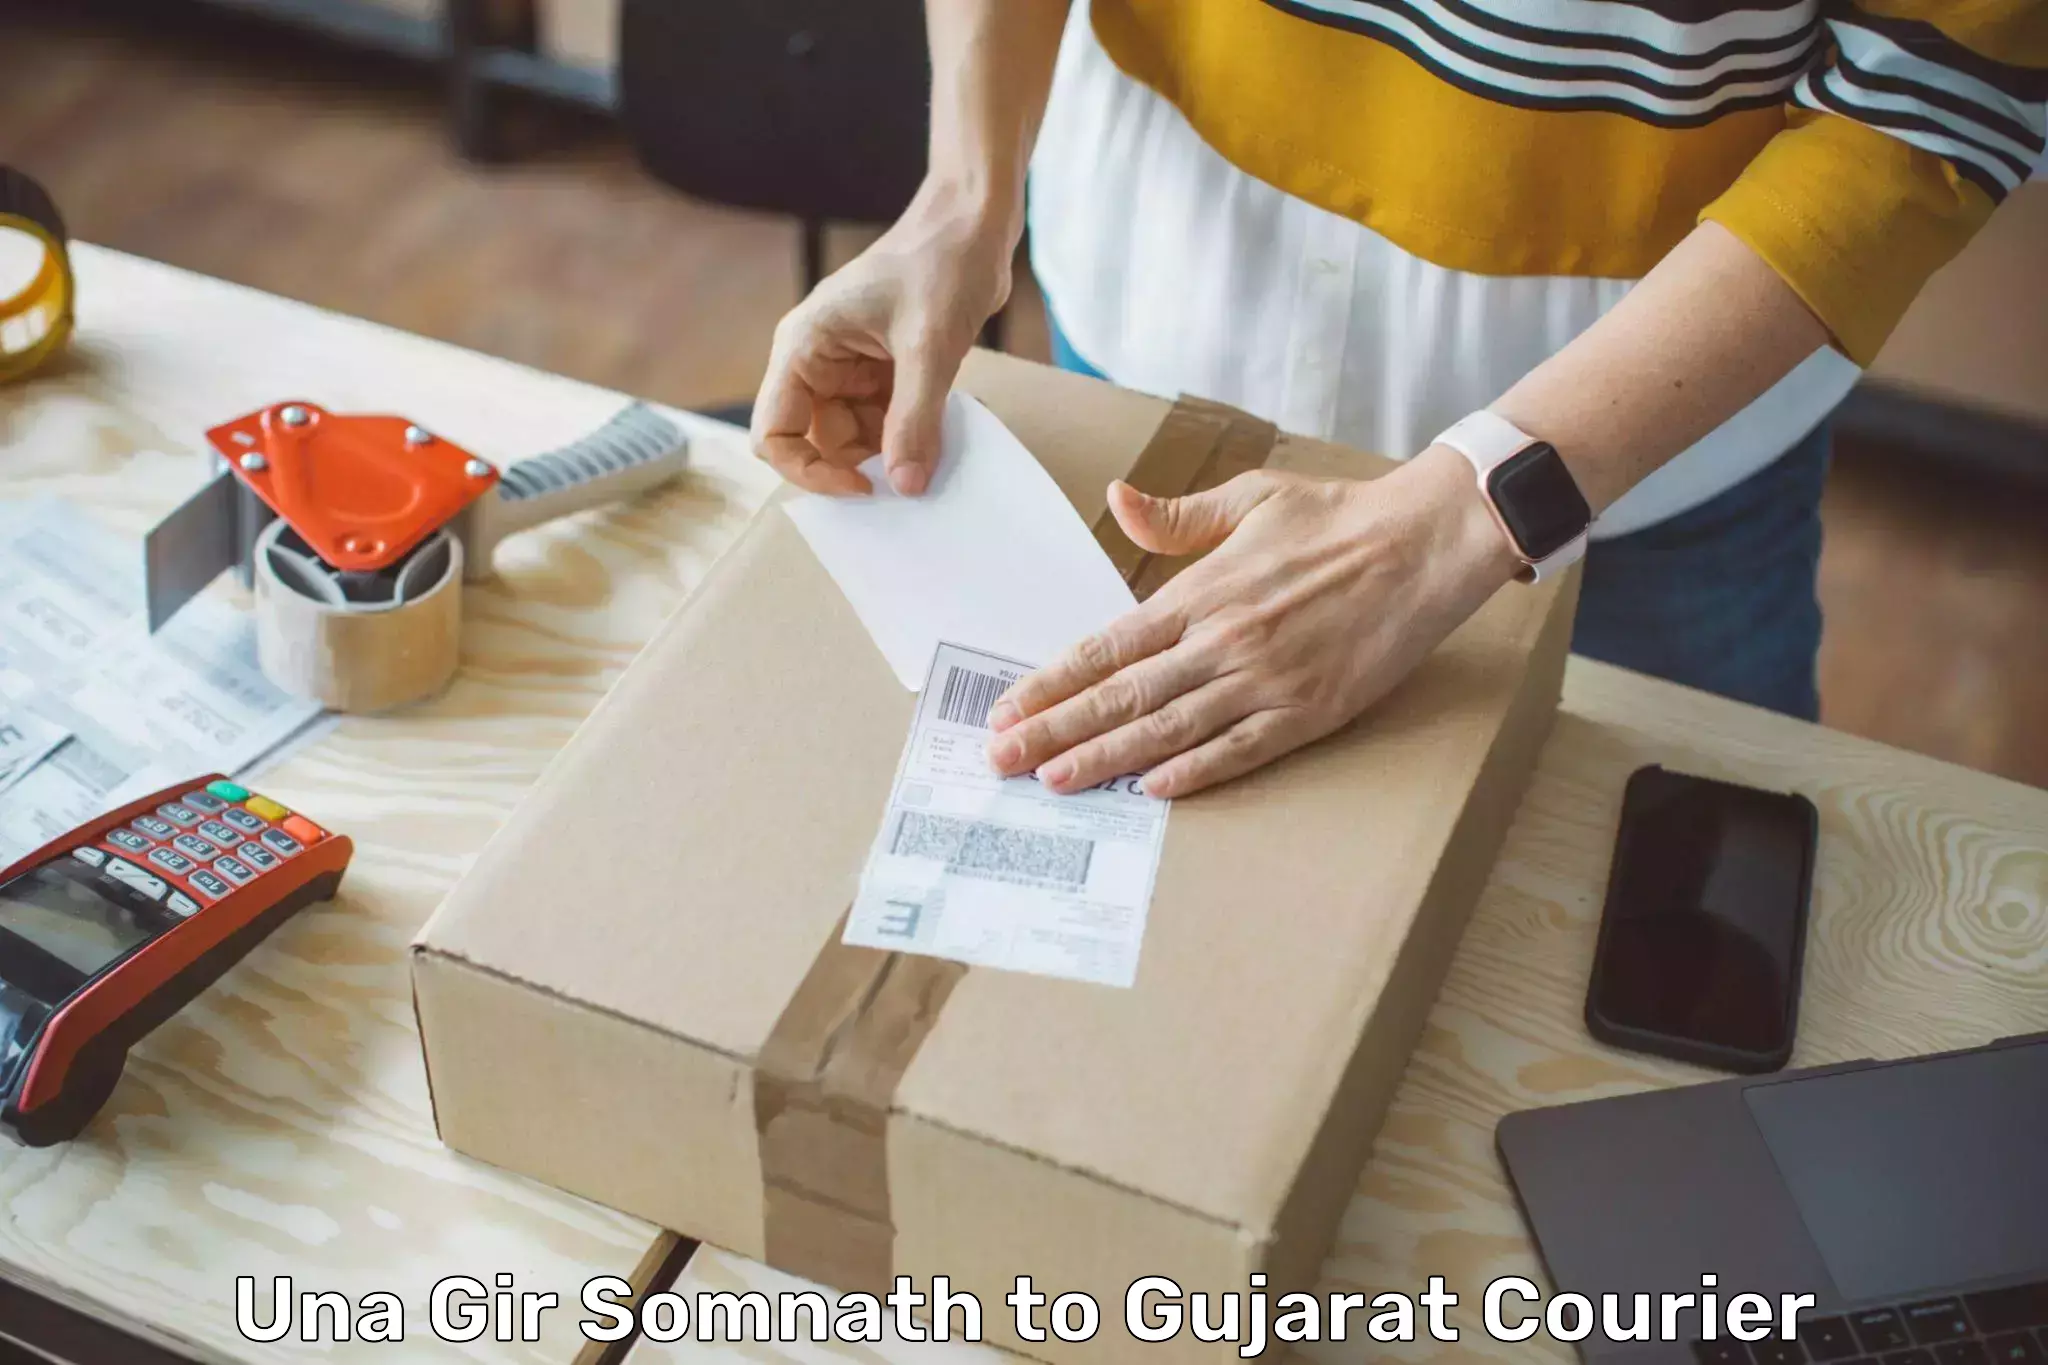 Residential courier service Una Gir Somnath to Becharaji